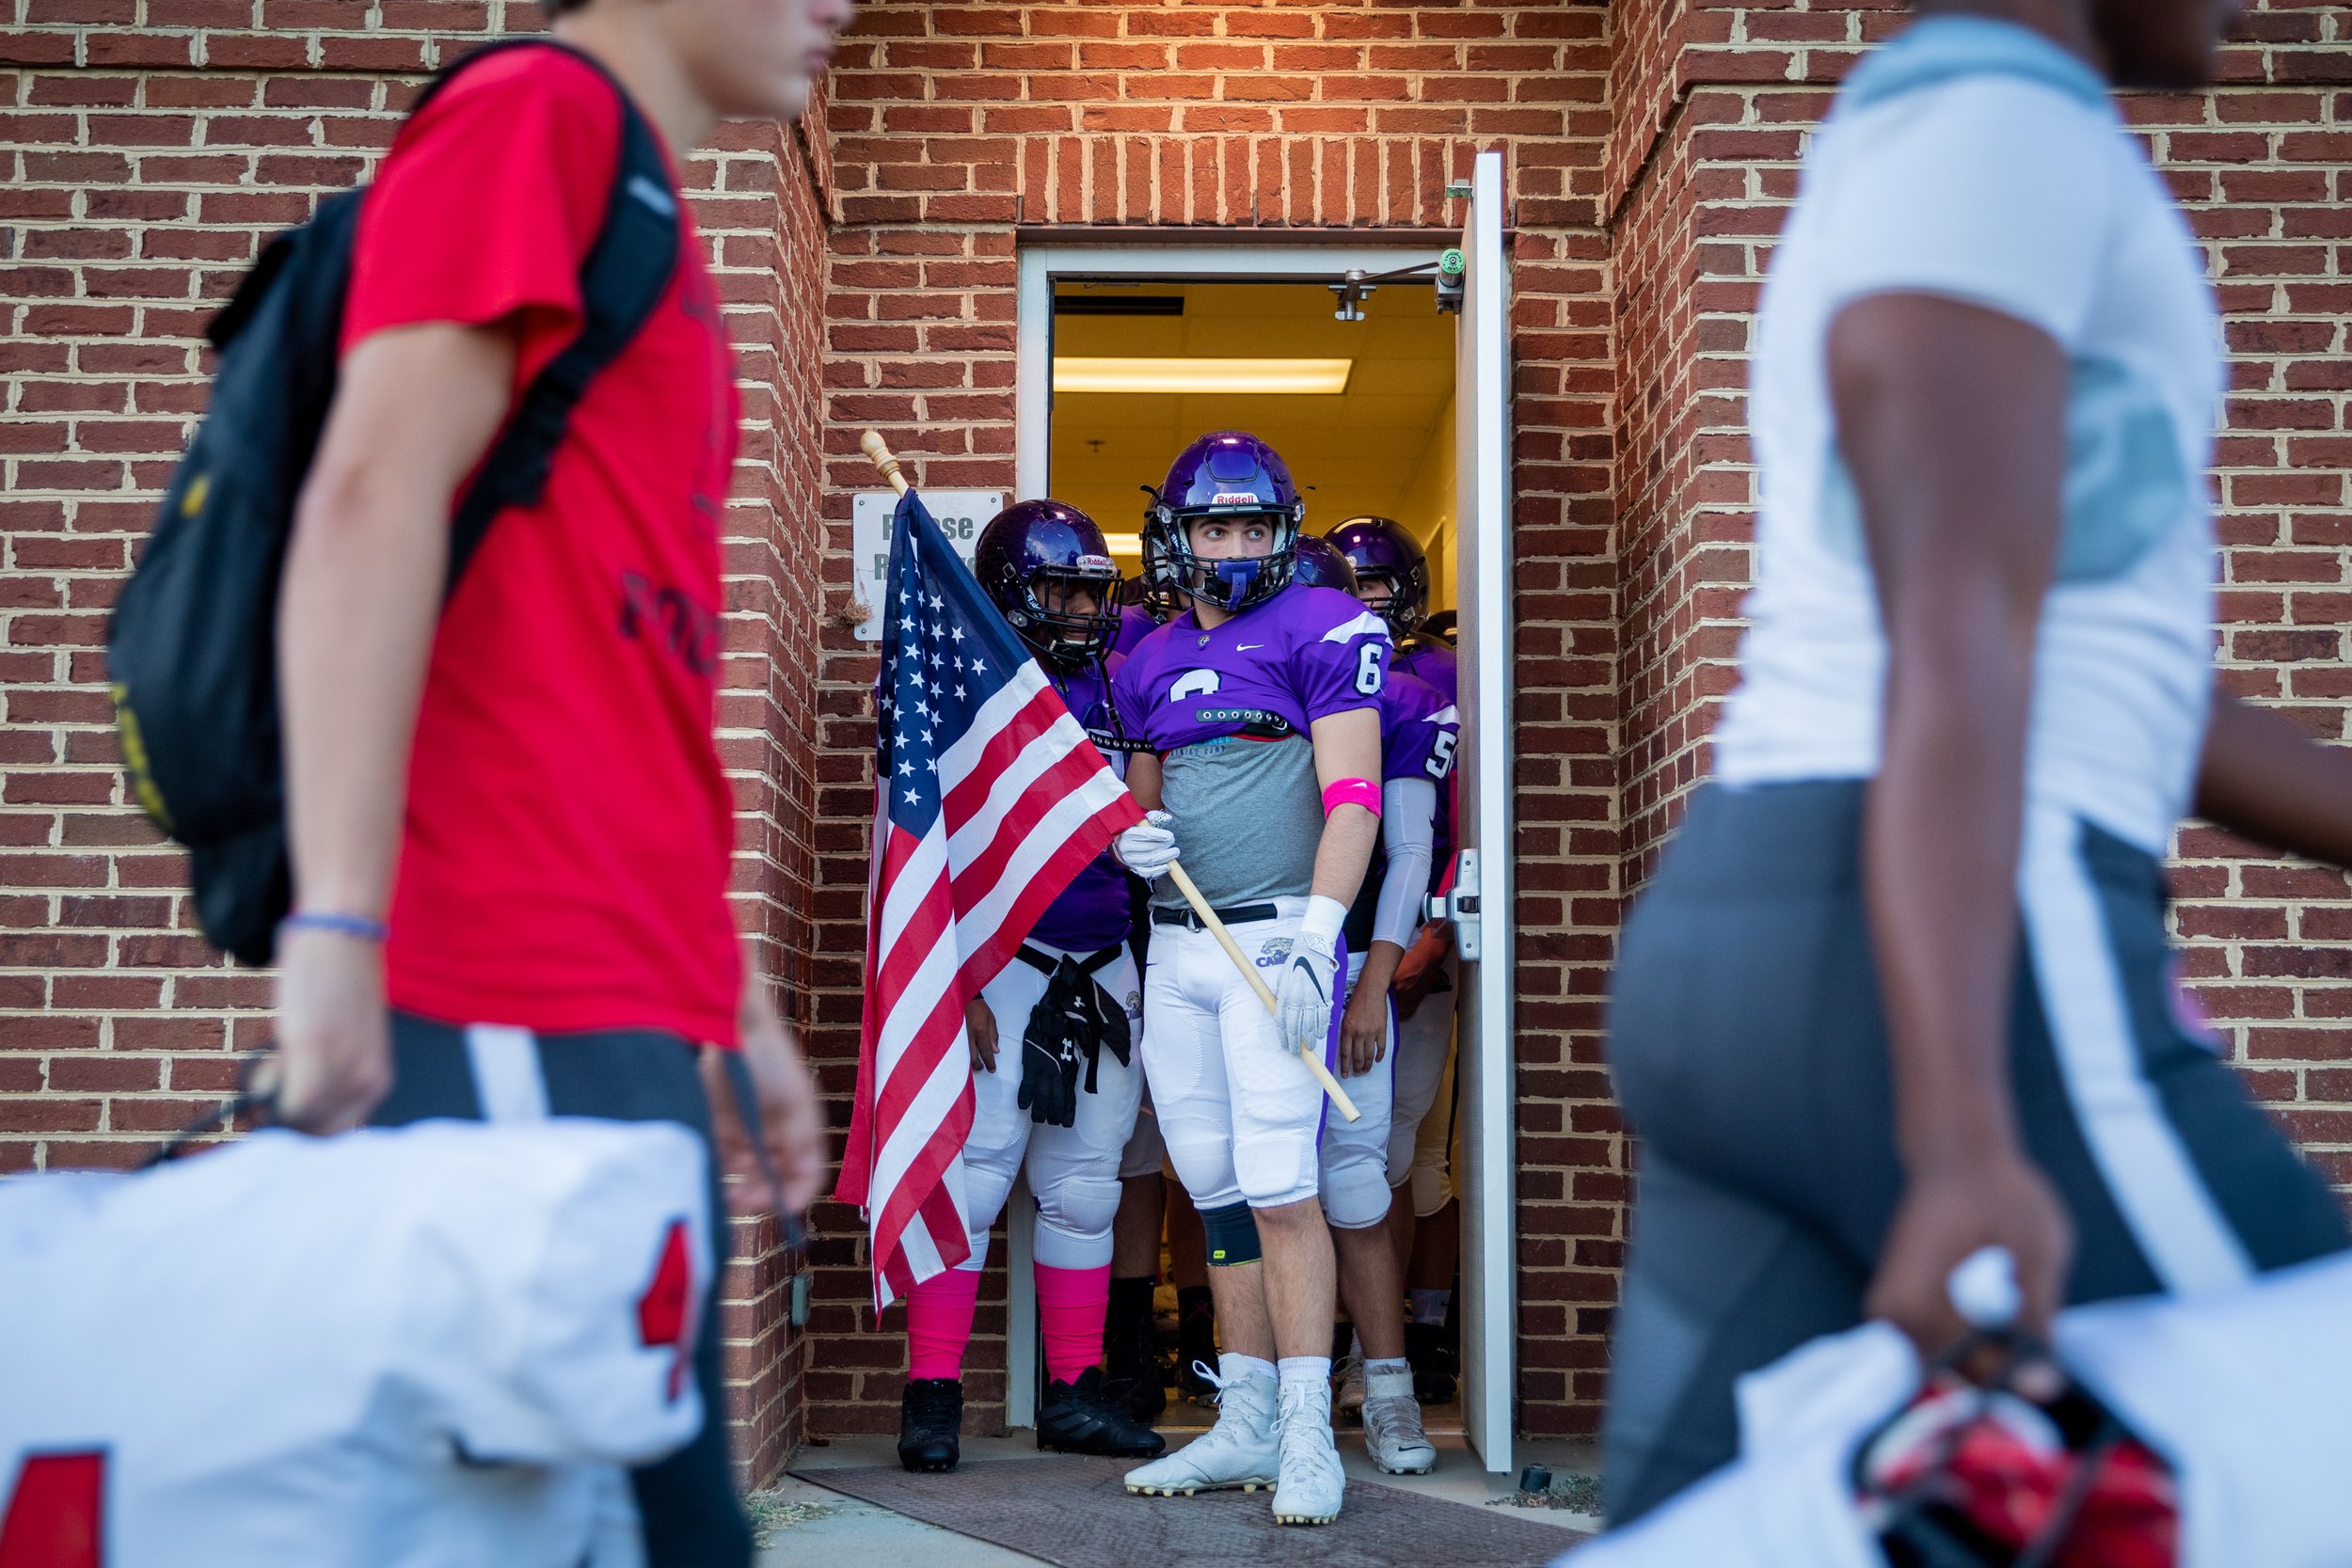  Senior, Braden Hunter holds the American Flag as he and his team get ready to storm the field, a tradition the team performs before every home game. Walking past the team are members of the opposing team, the Graham High School Red Devils. 